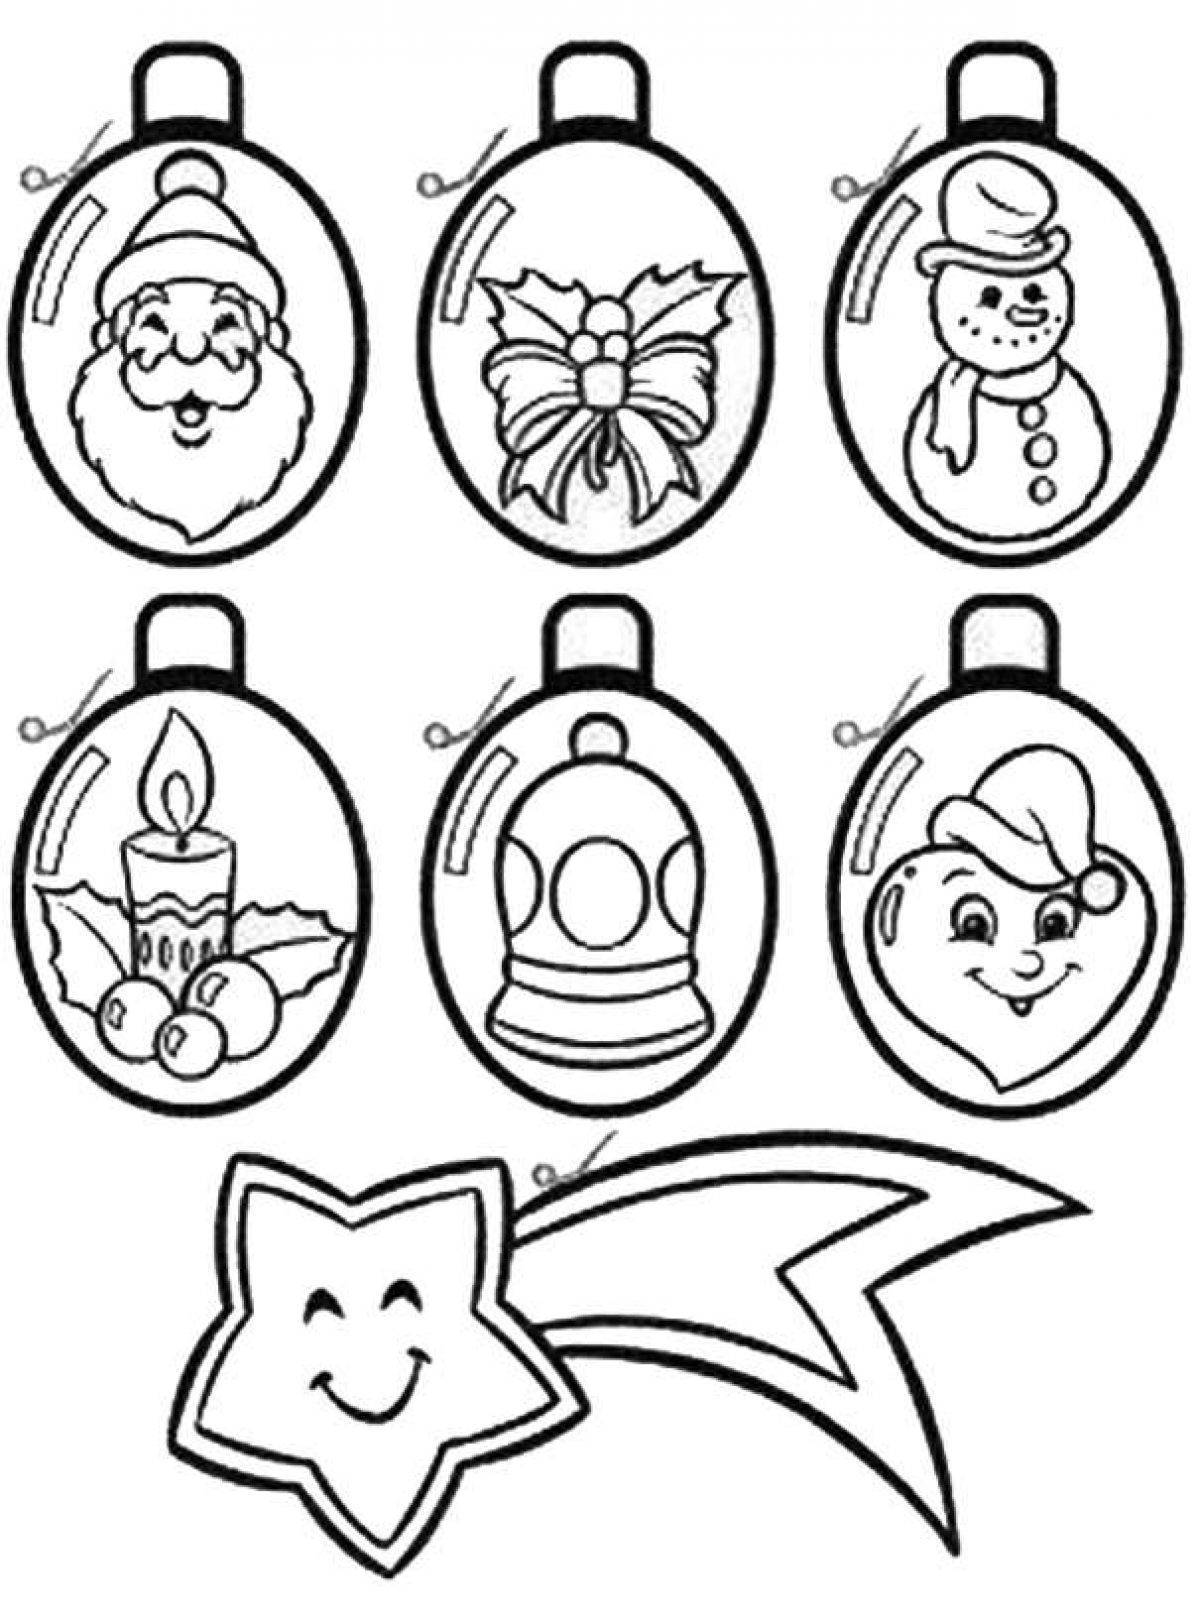 Christmas tree decoration coloring page